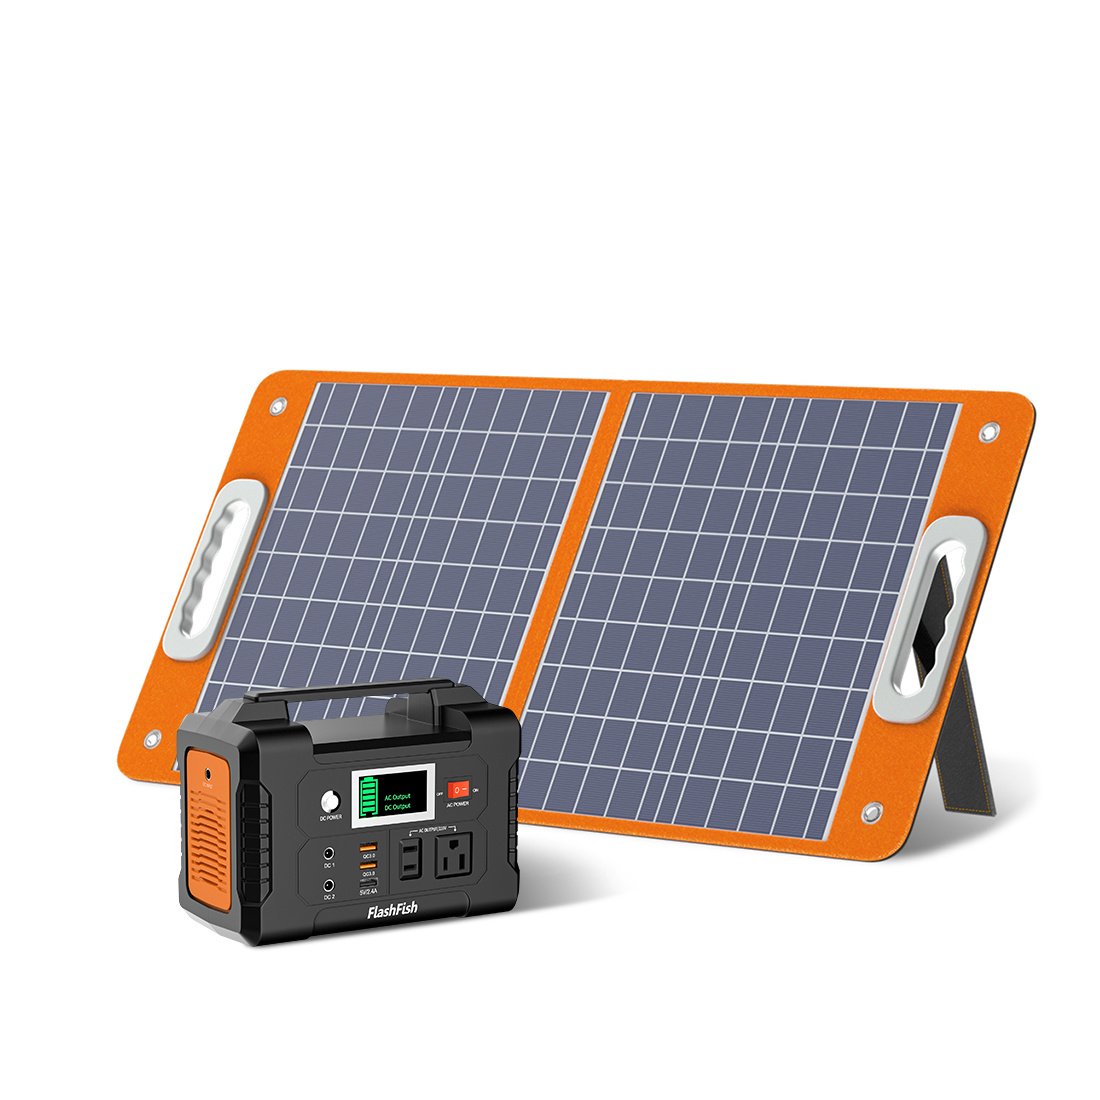 200W Portable Power Station, 40800mAh Solar Generator with 110V AC Outlet/2 DC Ports/3 USB Ports